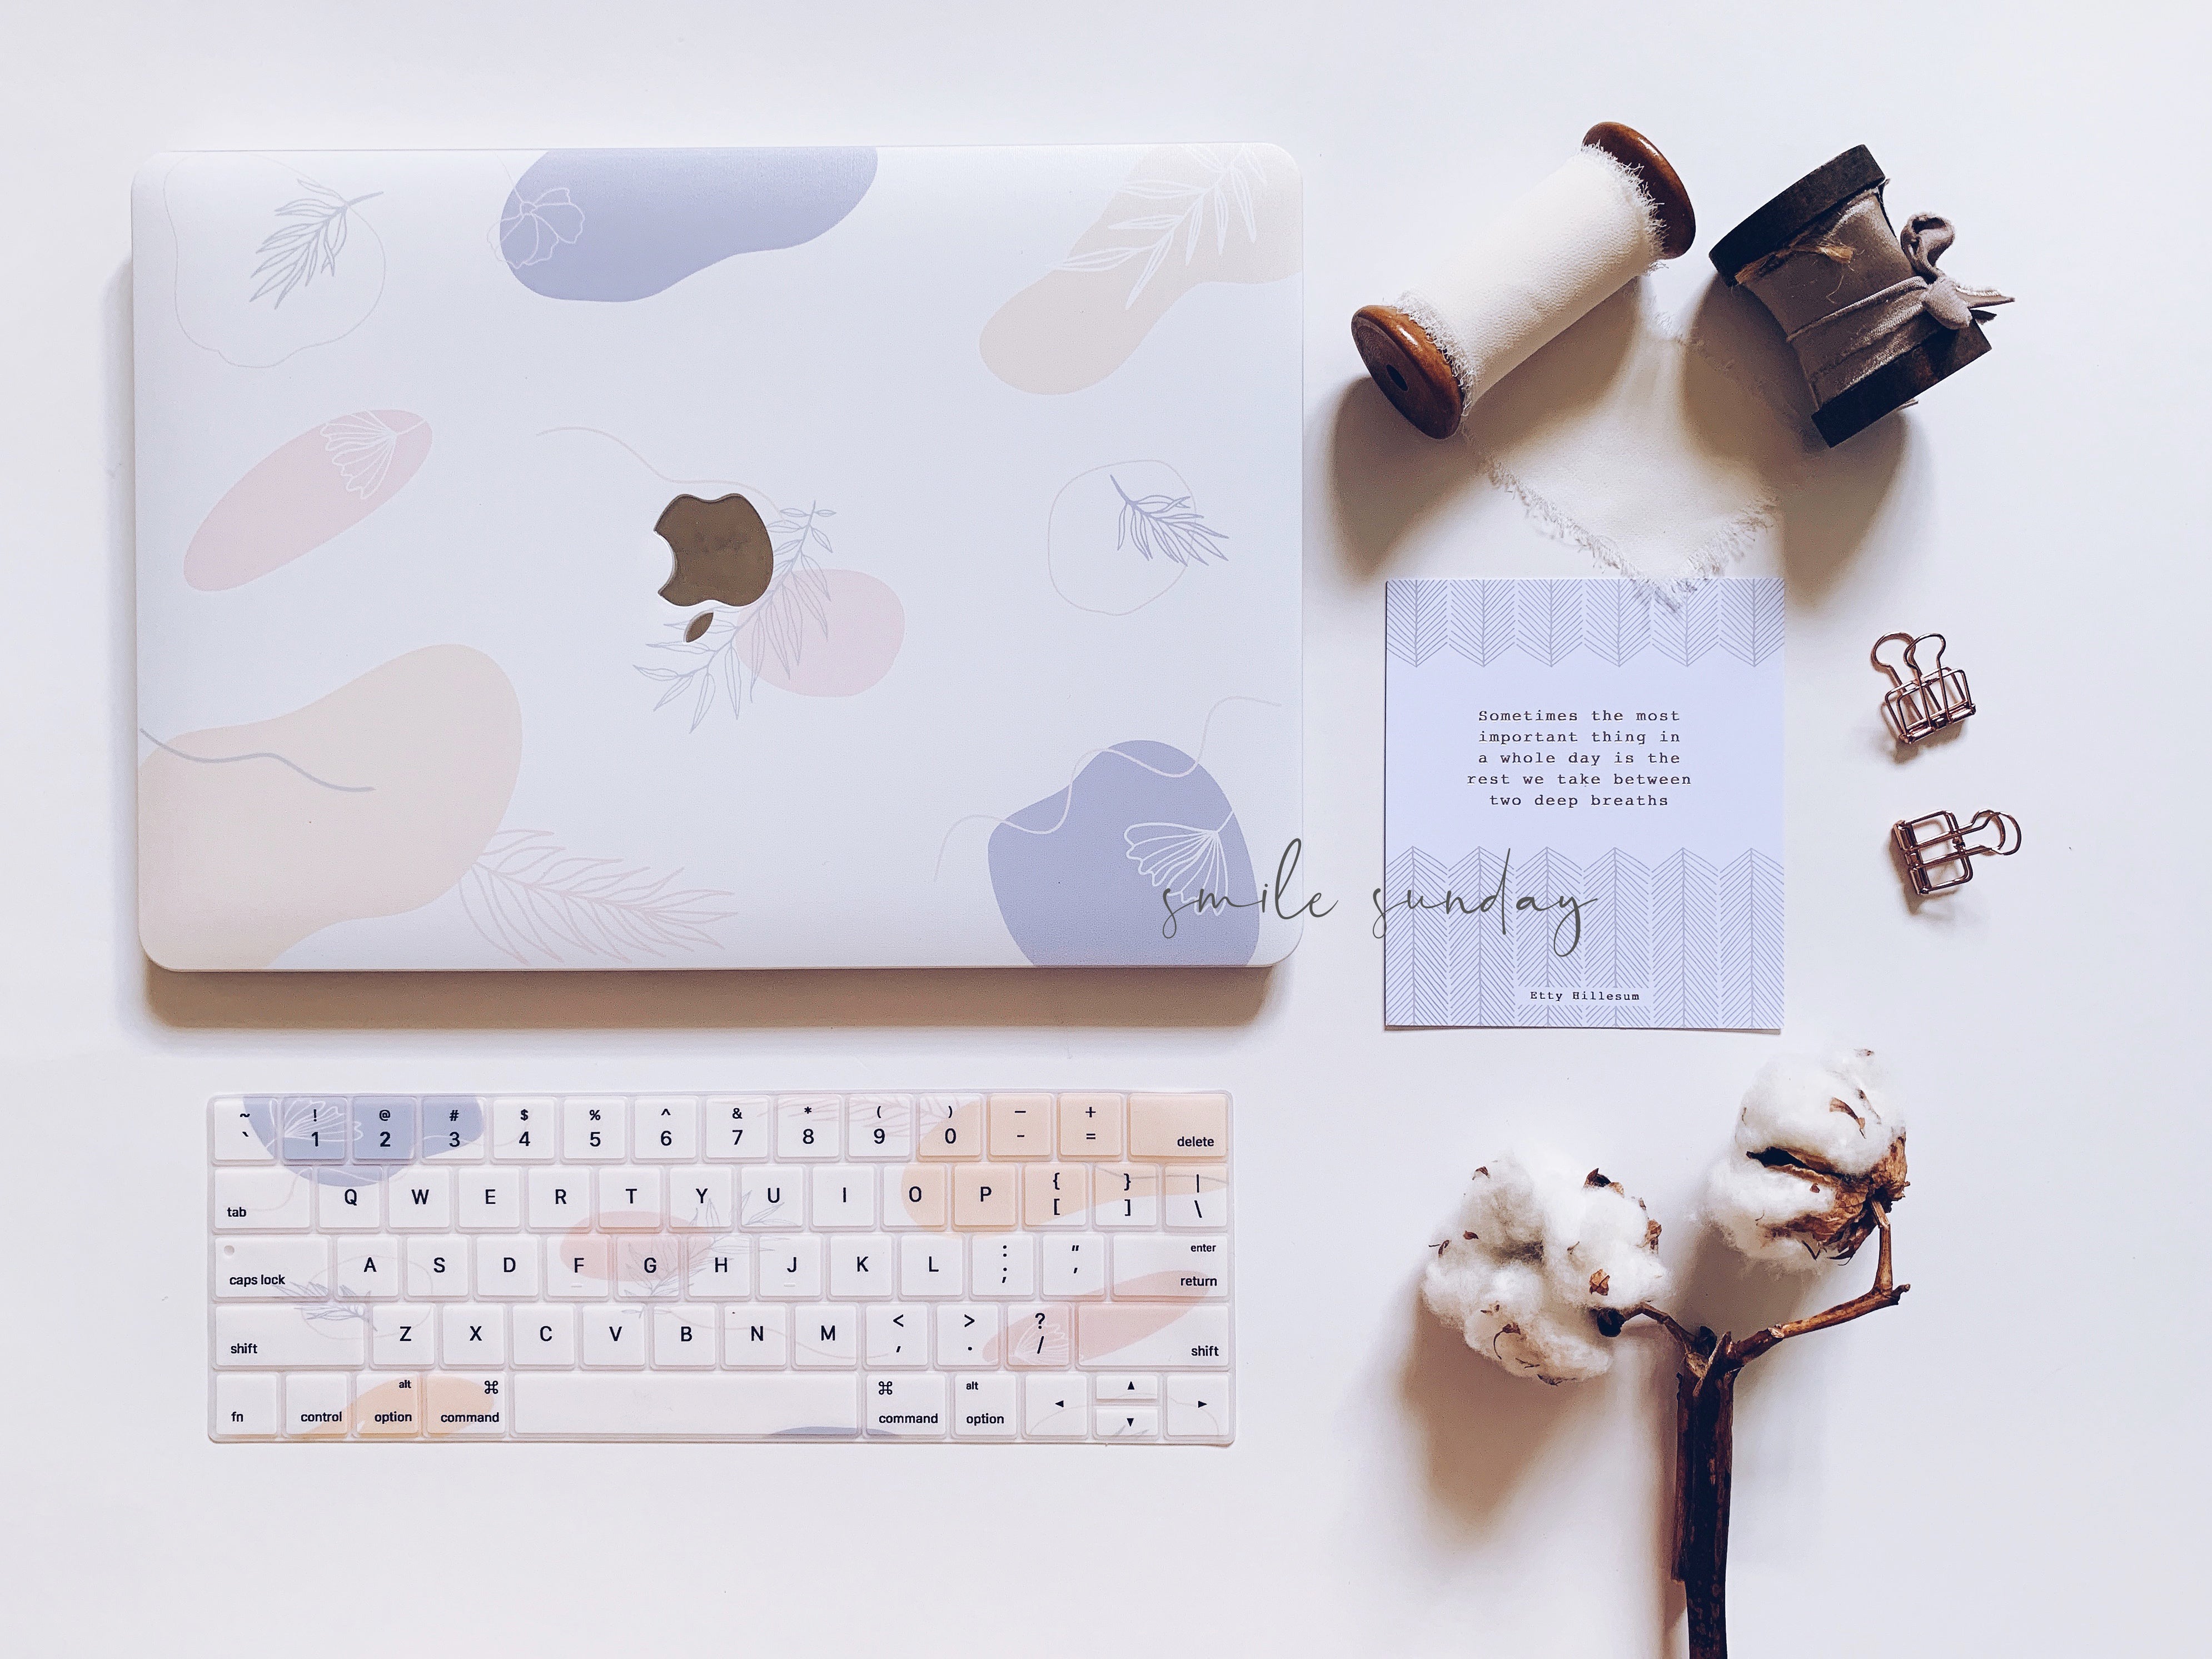 [New Colour] Willow Field Serendipity Macbook Pro/Air/Retina Case + Matching Keyboard Cover